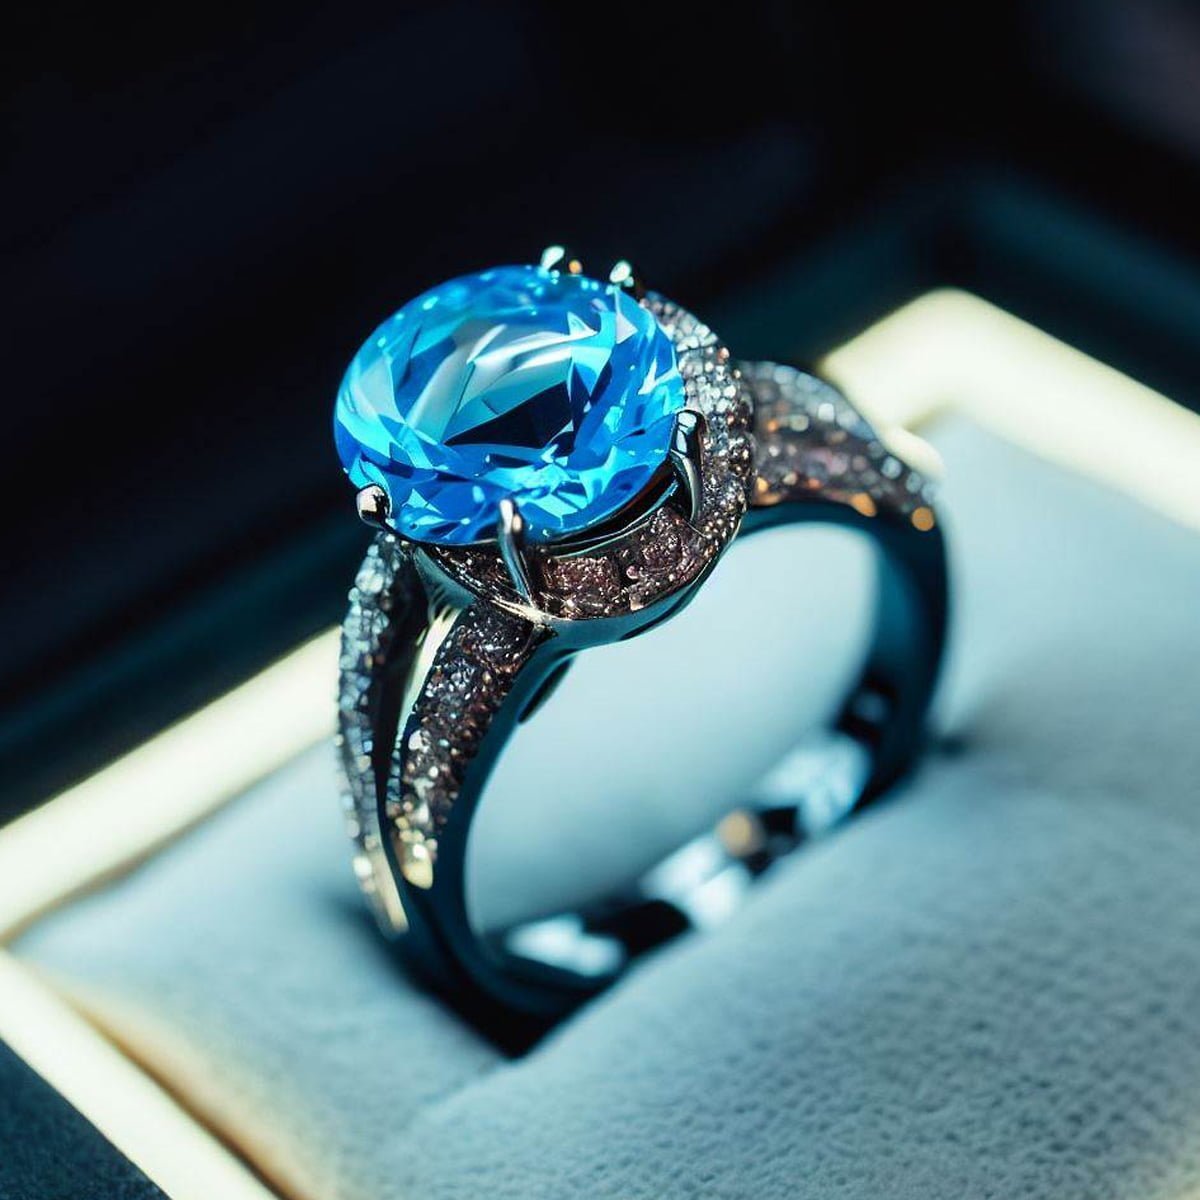 11.28-Carat 'Infinite Blue' Could Sell for $37MM at Single-Lot Sotheby –  Beeghly & Co.